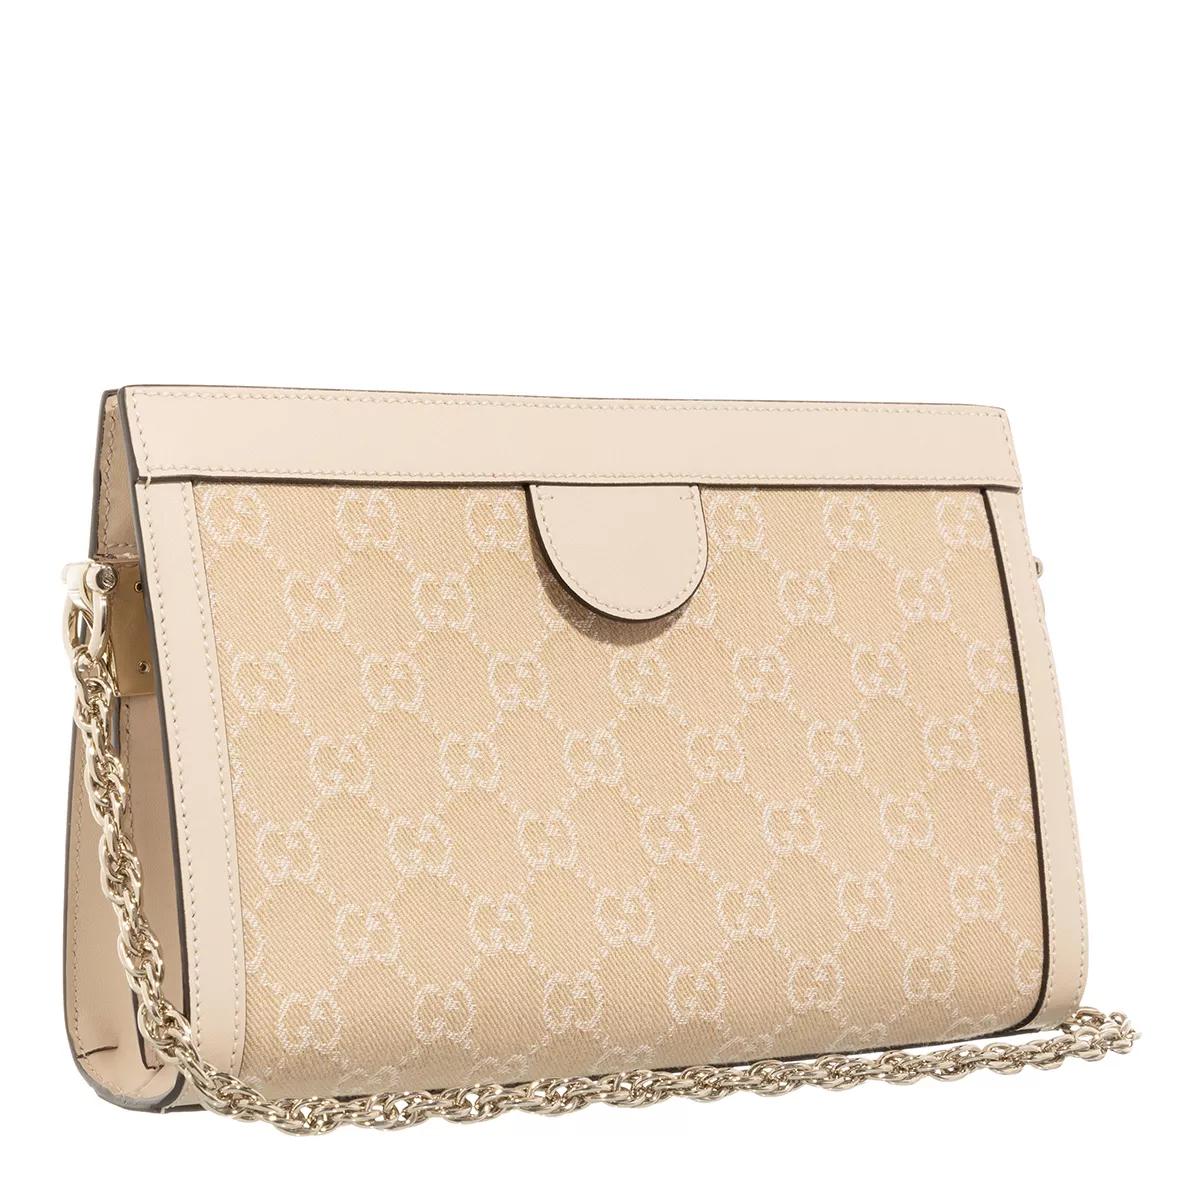 Gucci Crossbody bags Ophidi GG Small Shoulder Bag in beige